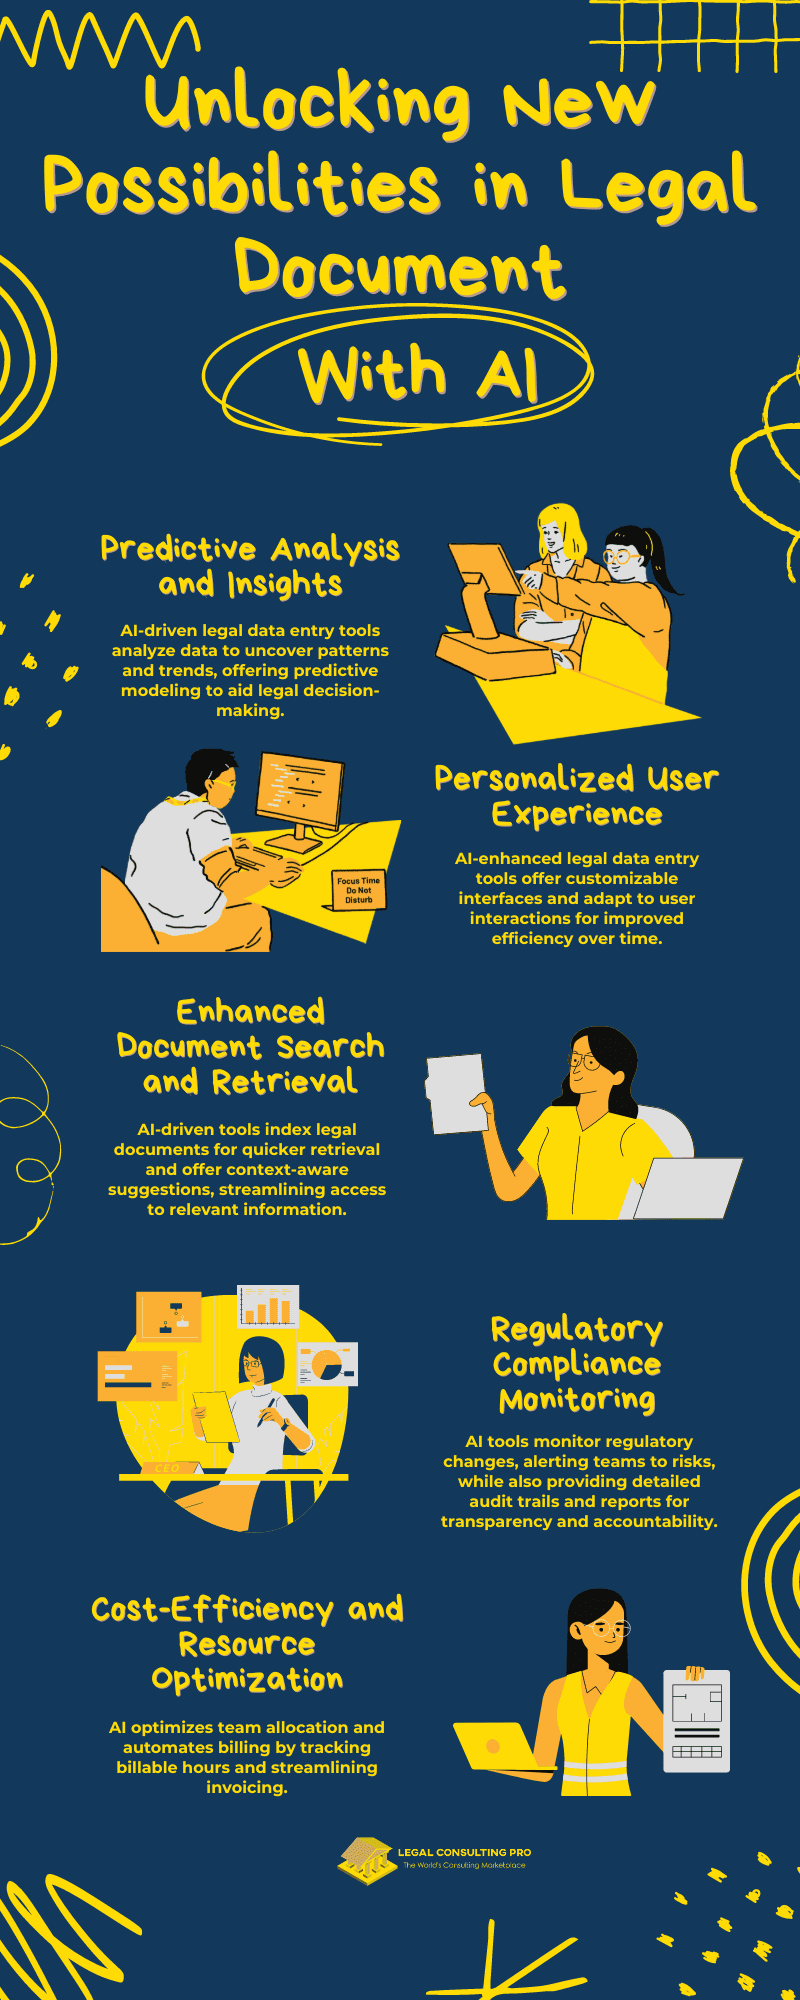 Unlocking New Possibilities with AI Infographic